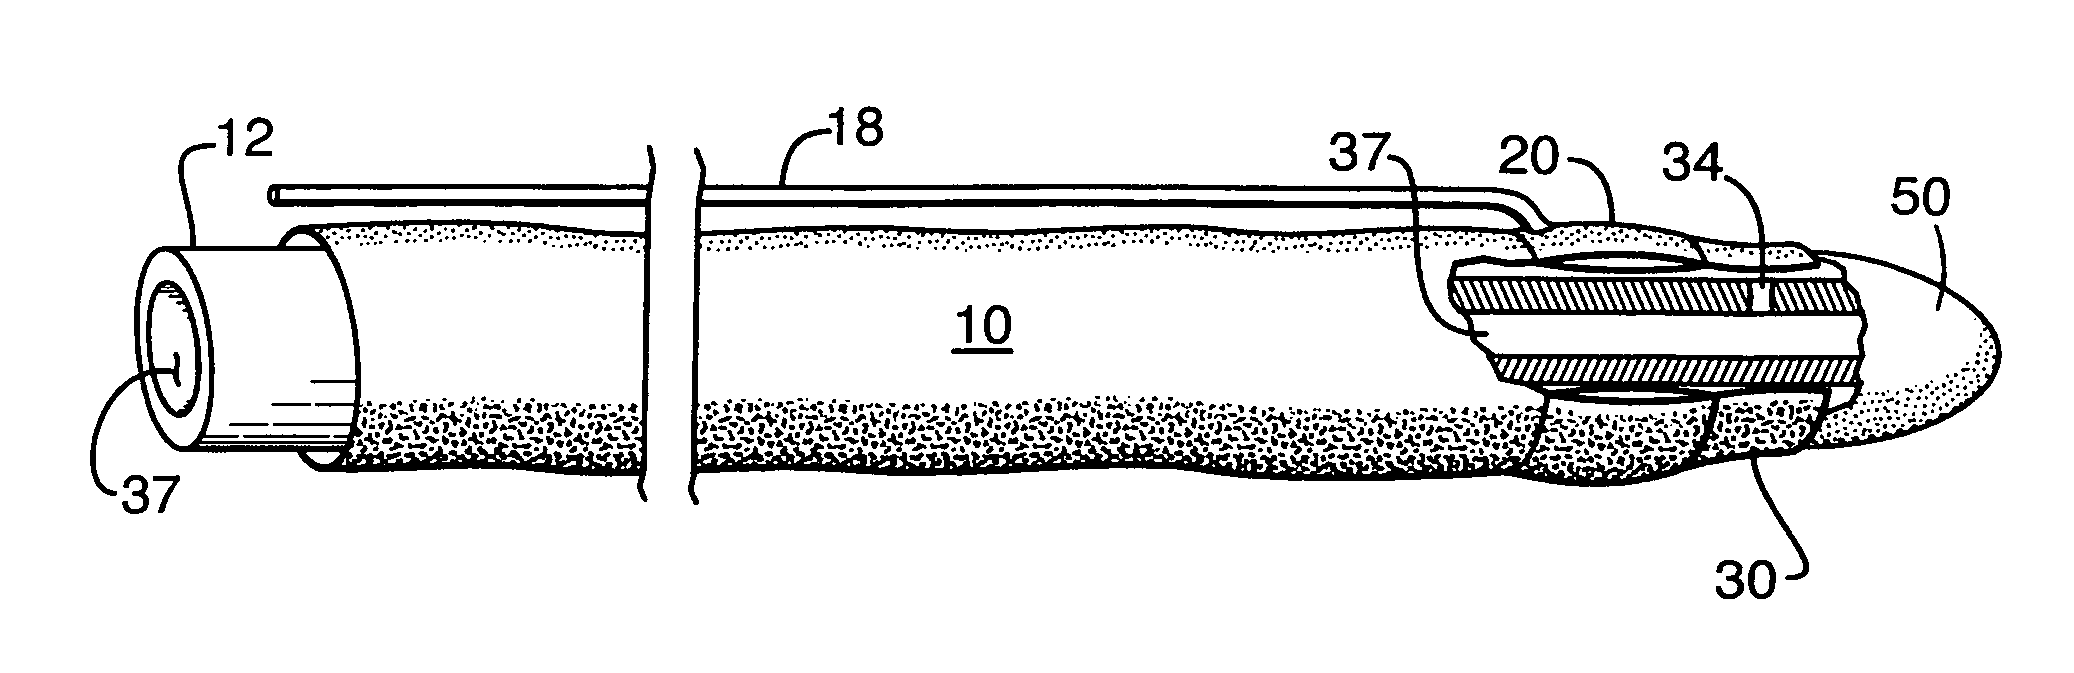 Flaccid tubular membrane and insertion appliance for surgical intubation and method